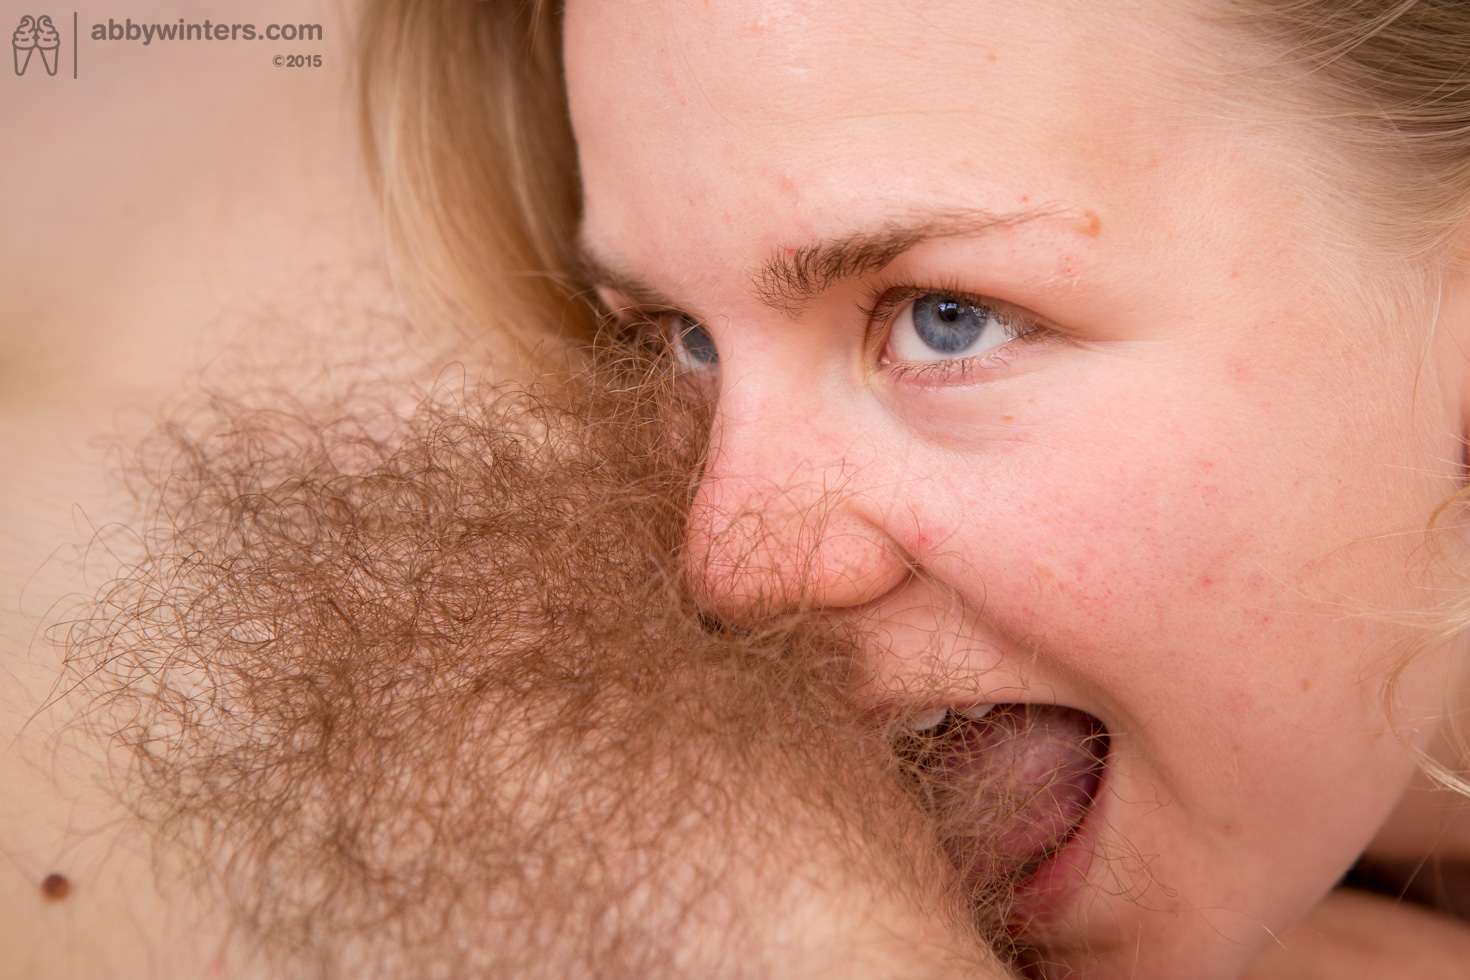 Hairy Fisting - Fisting hairy pussy | The Hairy Lady Blog